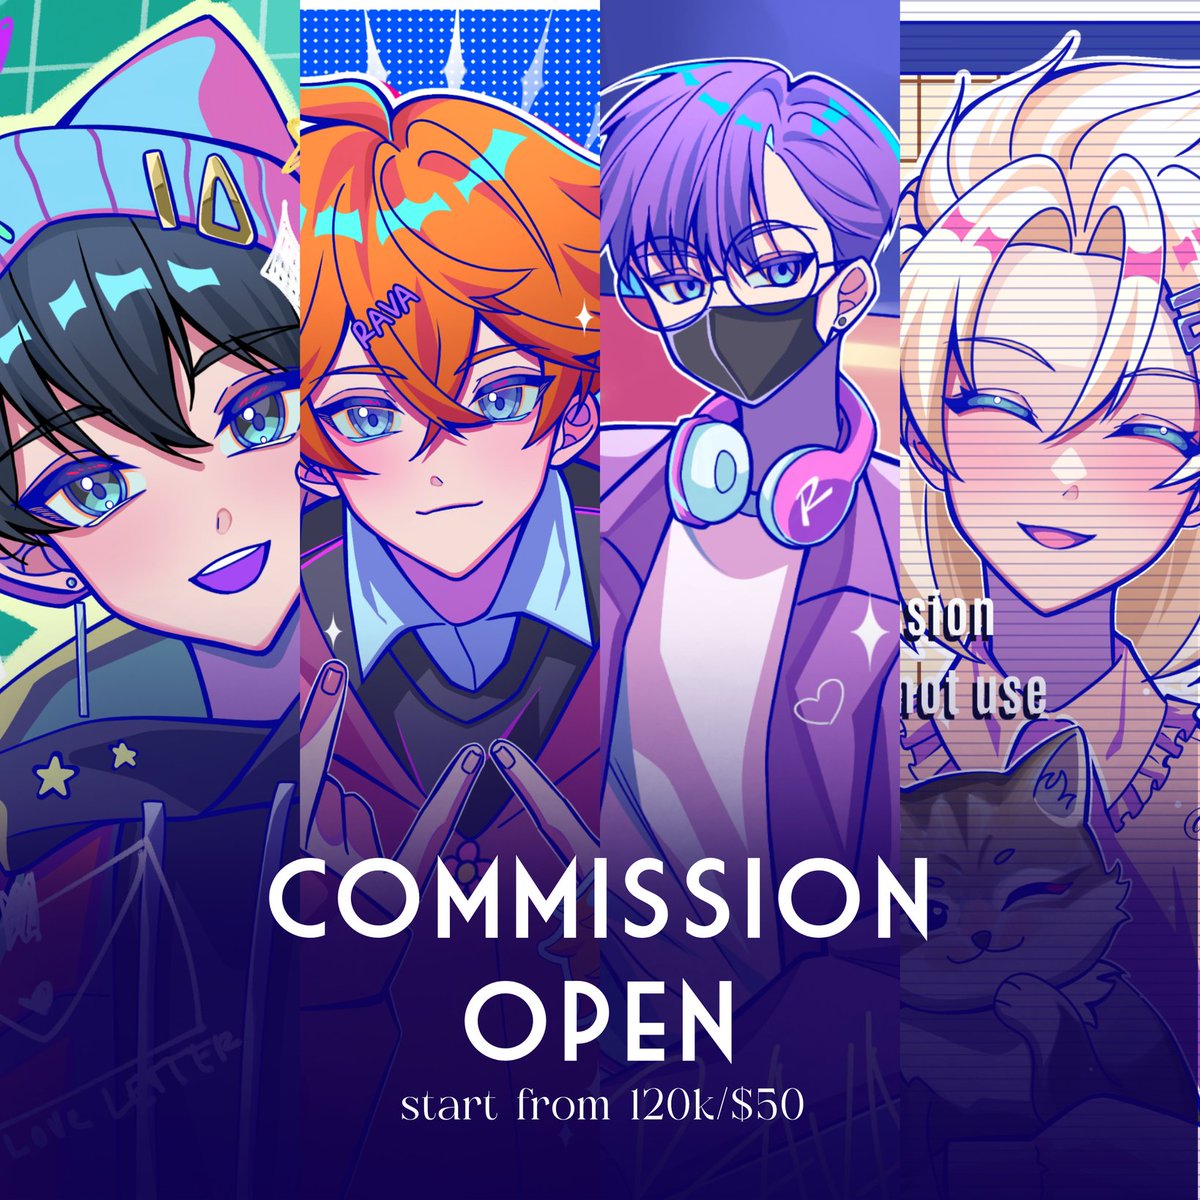 [Rts & like are very appreciated] 

RAVA OPEN COMMISSION, GUYS‼️
Please check :
#ravacomms #ravocs
ravalio.carrd.co
For more info / sample

AVAILABLE 3 STYLE ‼️
(Pssst, chibi style too!!)

Kindly DM me if you interested 
#opencommission #artidn 

👇👇